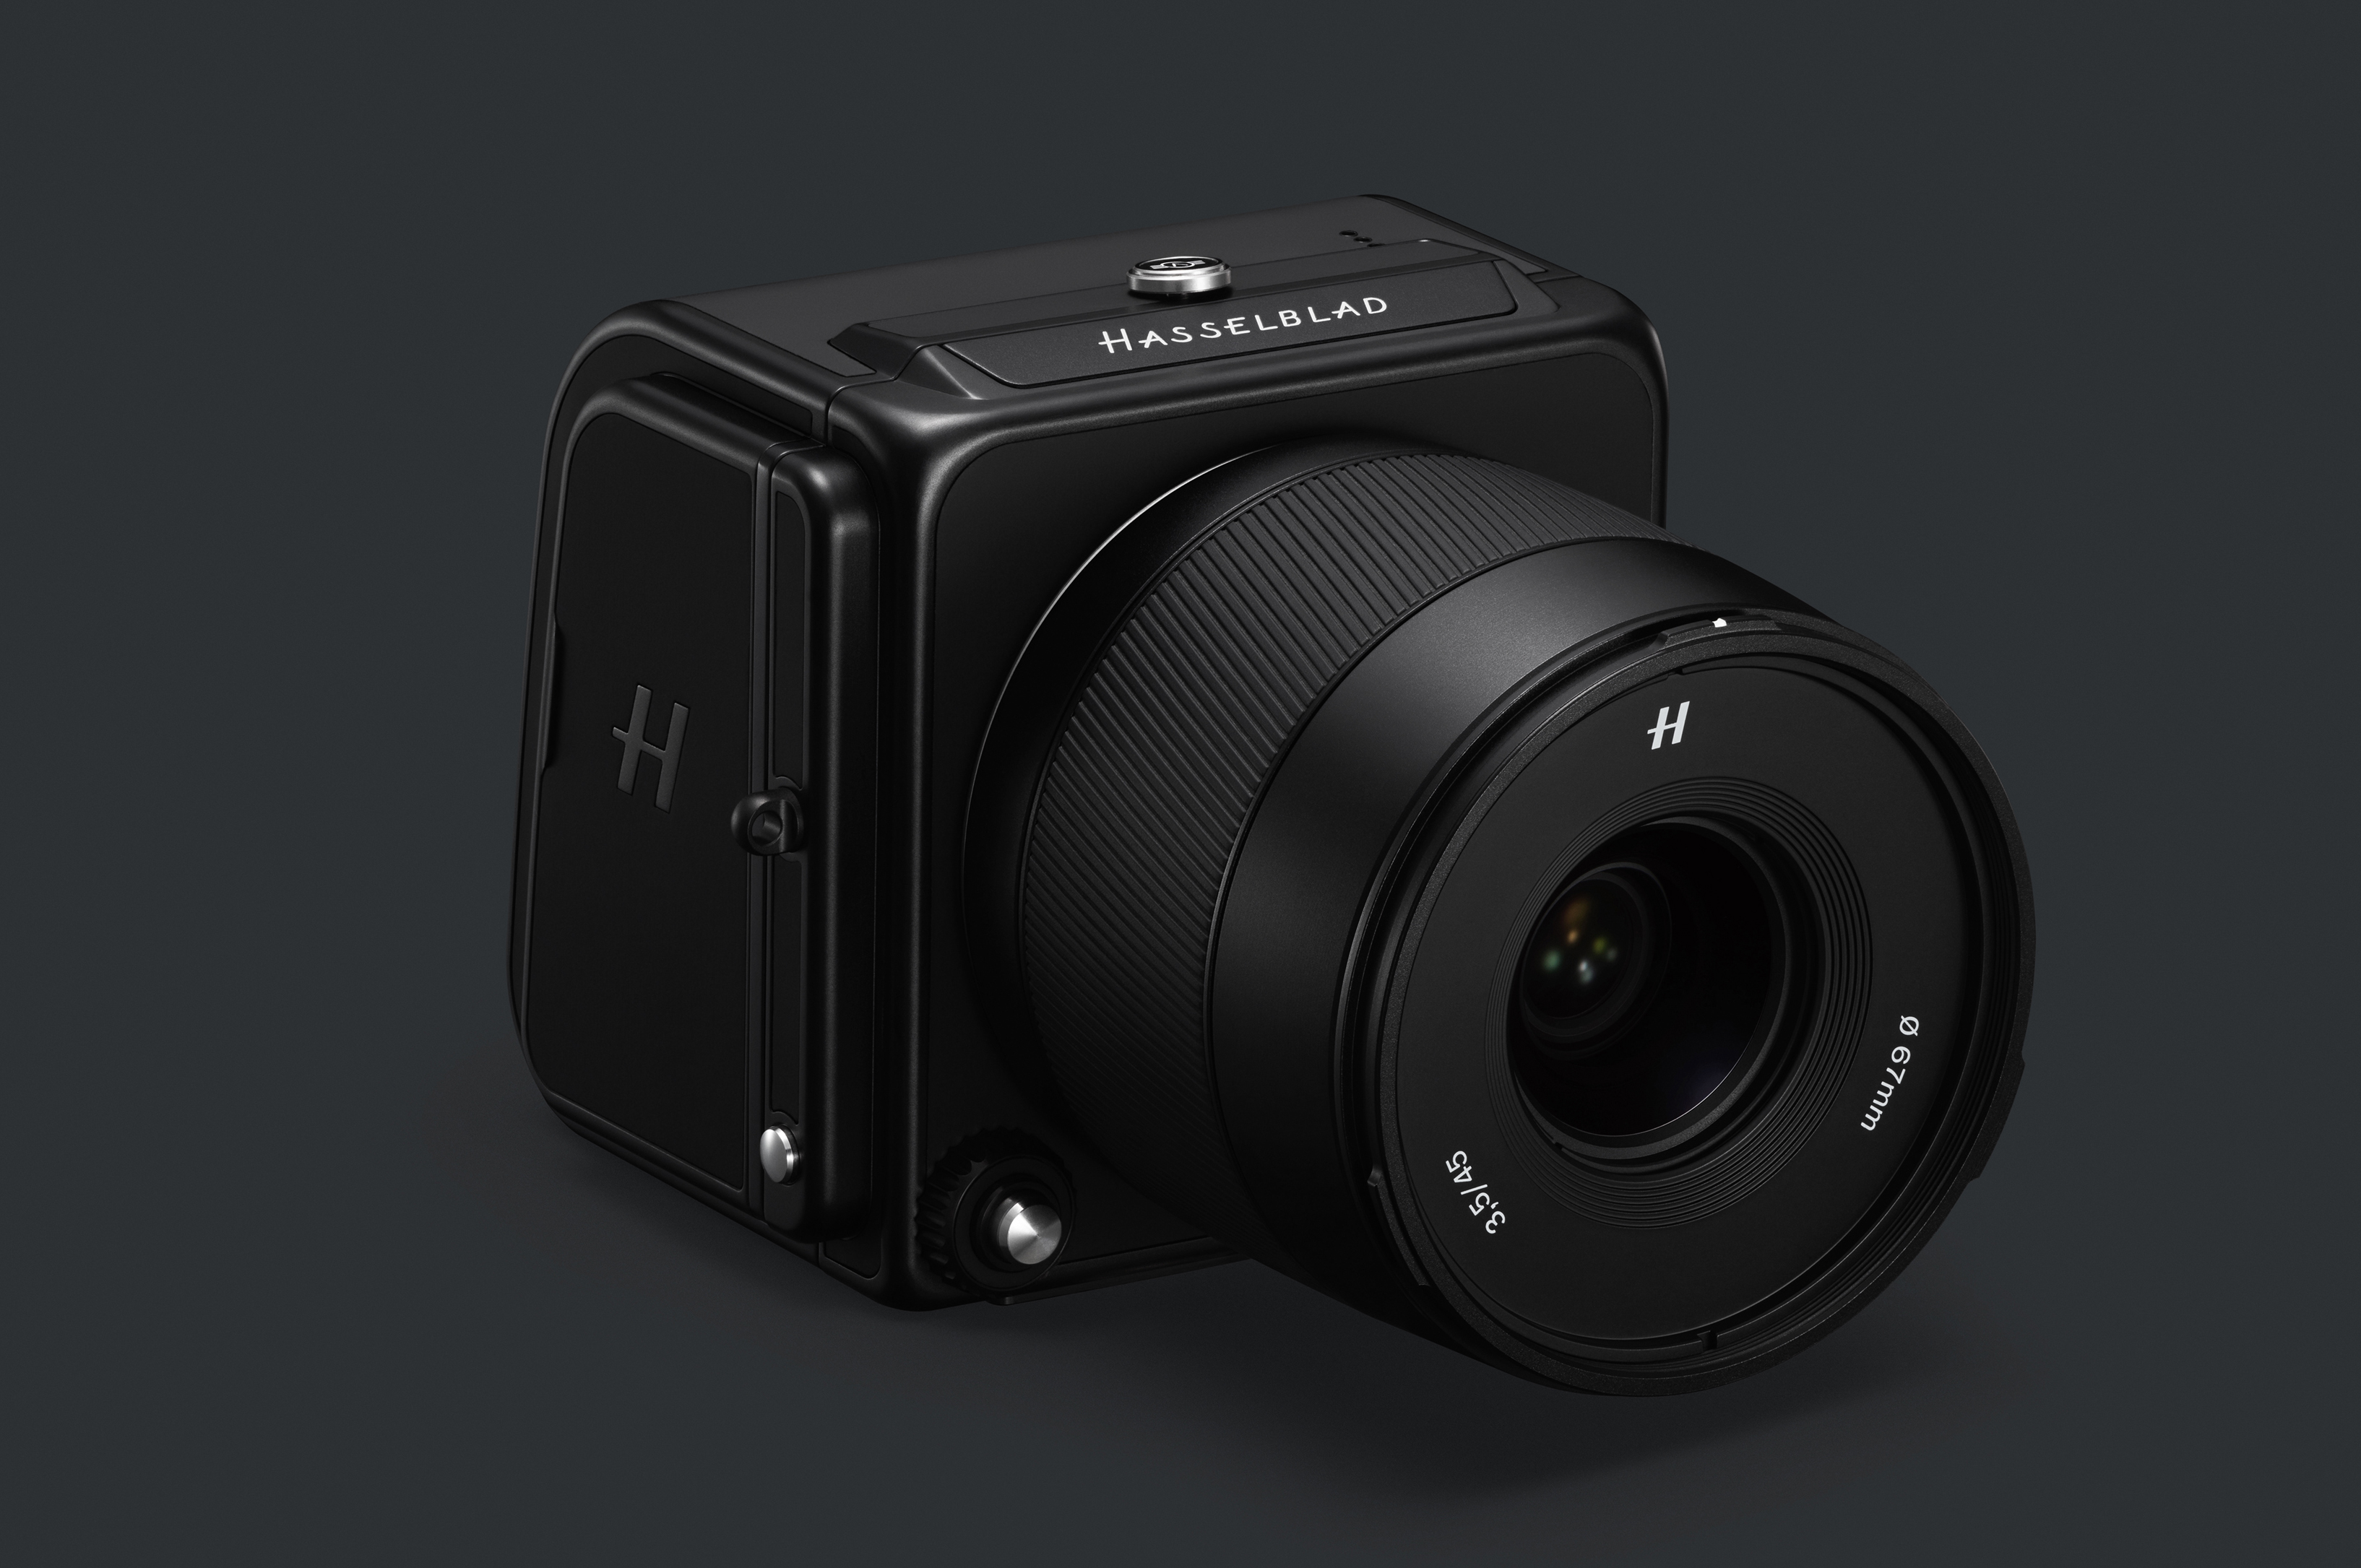  hasselblad celebrates years moon 907x special 